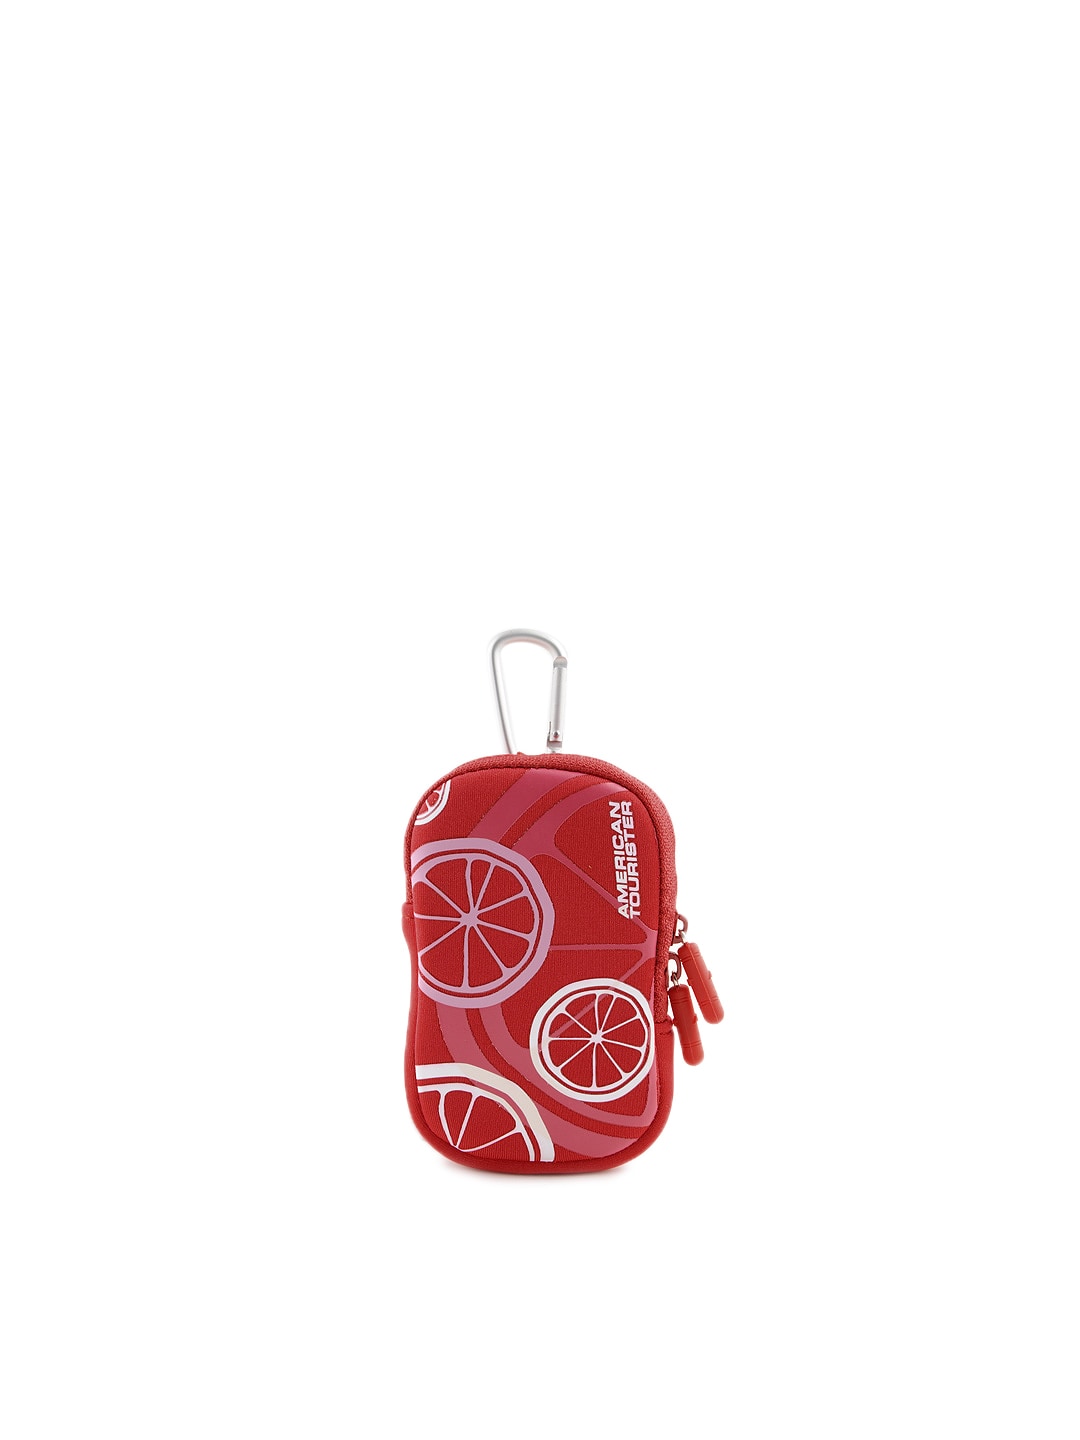 American Tourister Unisex Red Camera Bag